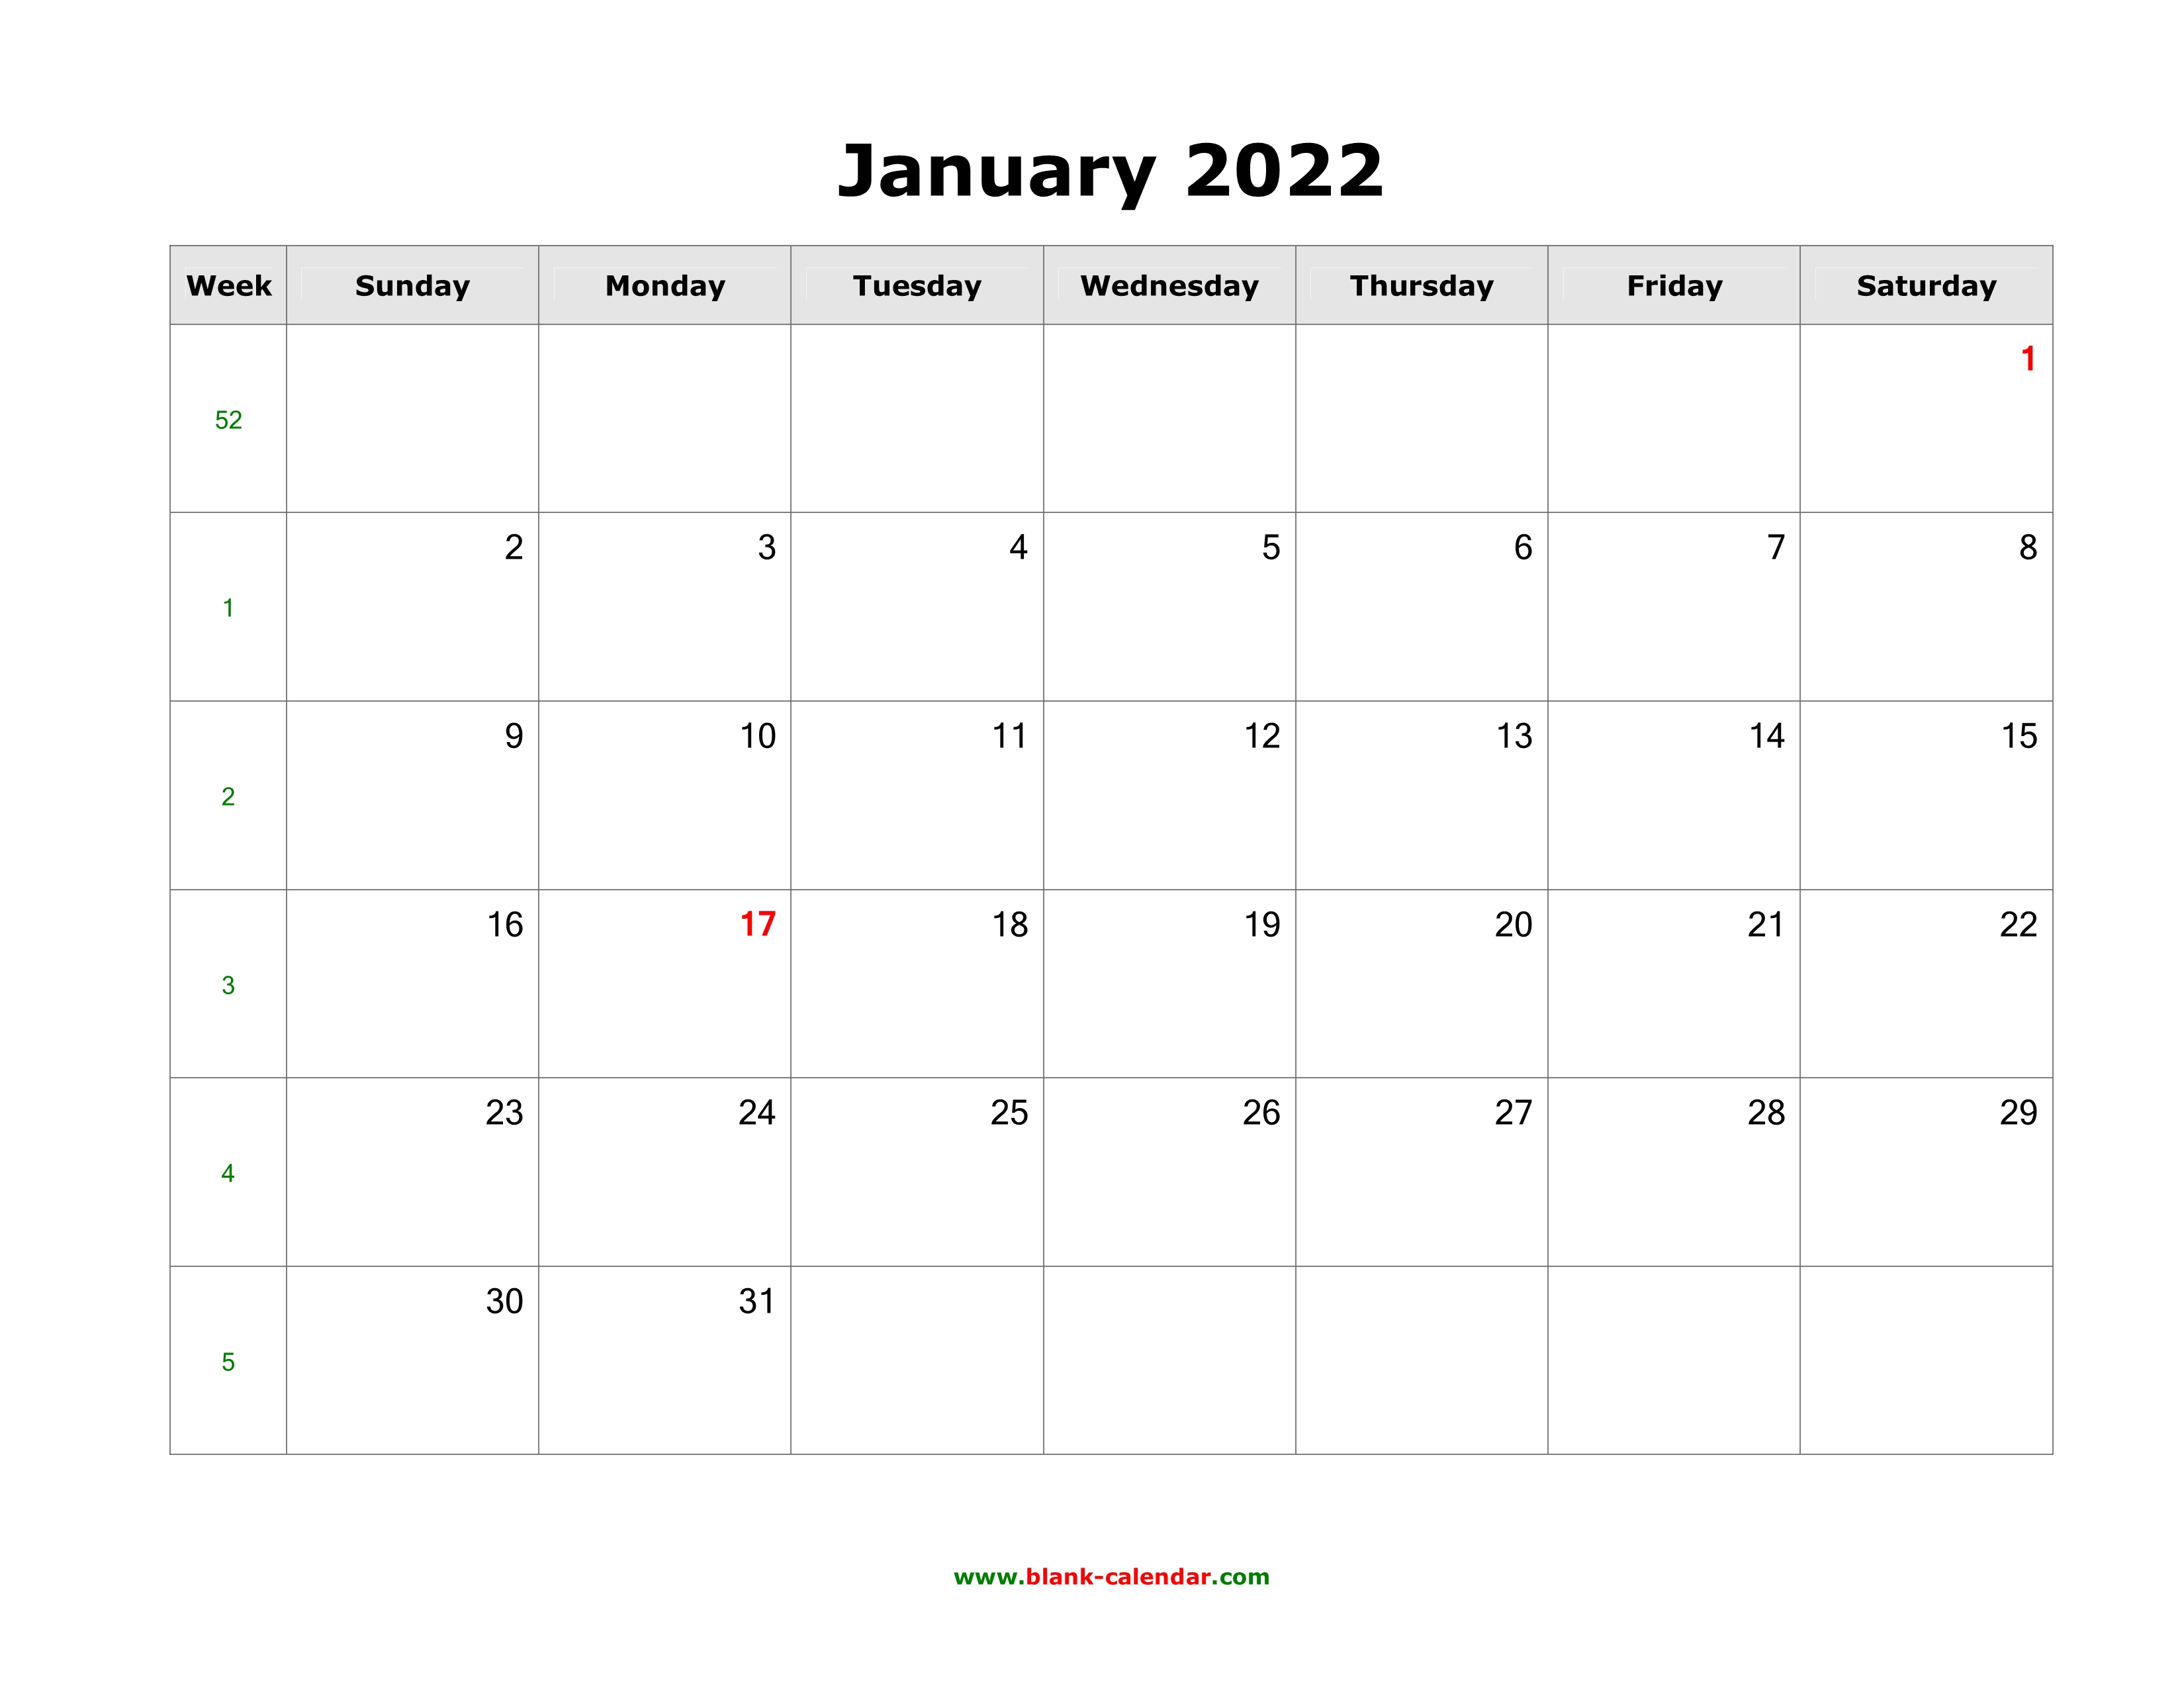 Month By Month 2022 Calendar Download Blank Calendar 2022 (12 Pages, One Month Per Page, Horizontal)